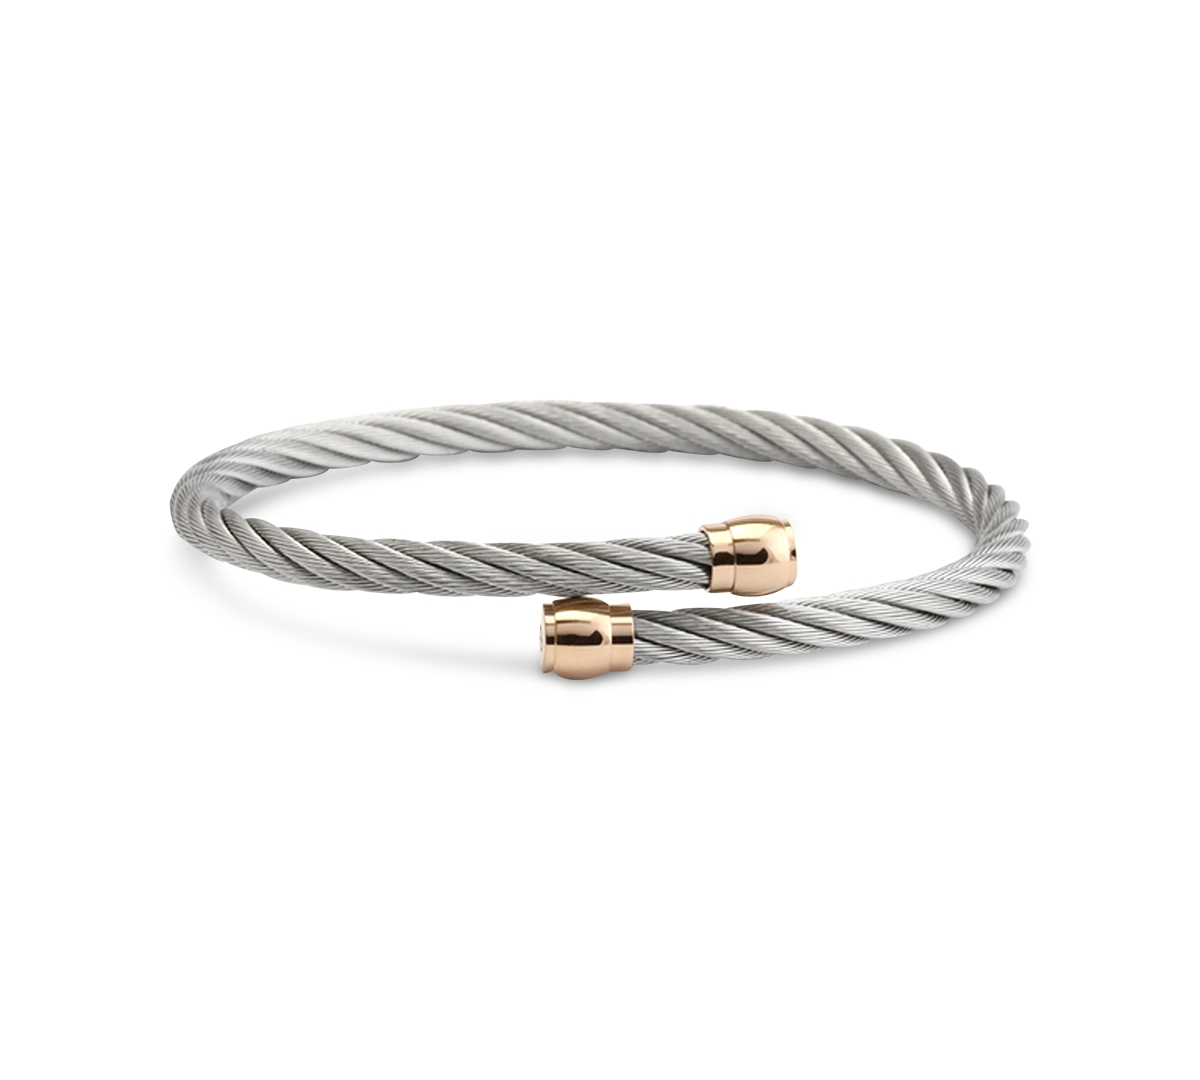 Two-Tone Cable Bypass Bangle Bracelet in Pvd Stainless Steel & Rose Gold-Tone - Stainless Steel/Rose Gold